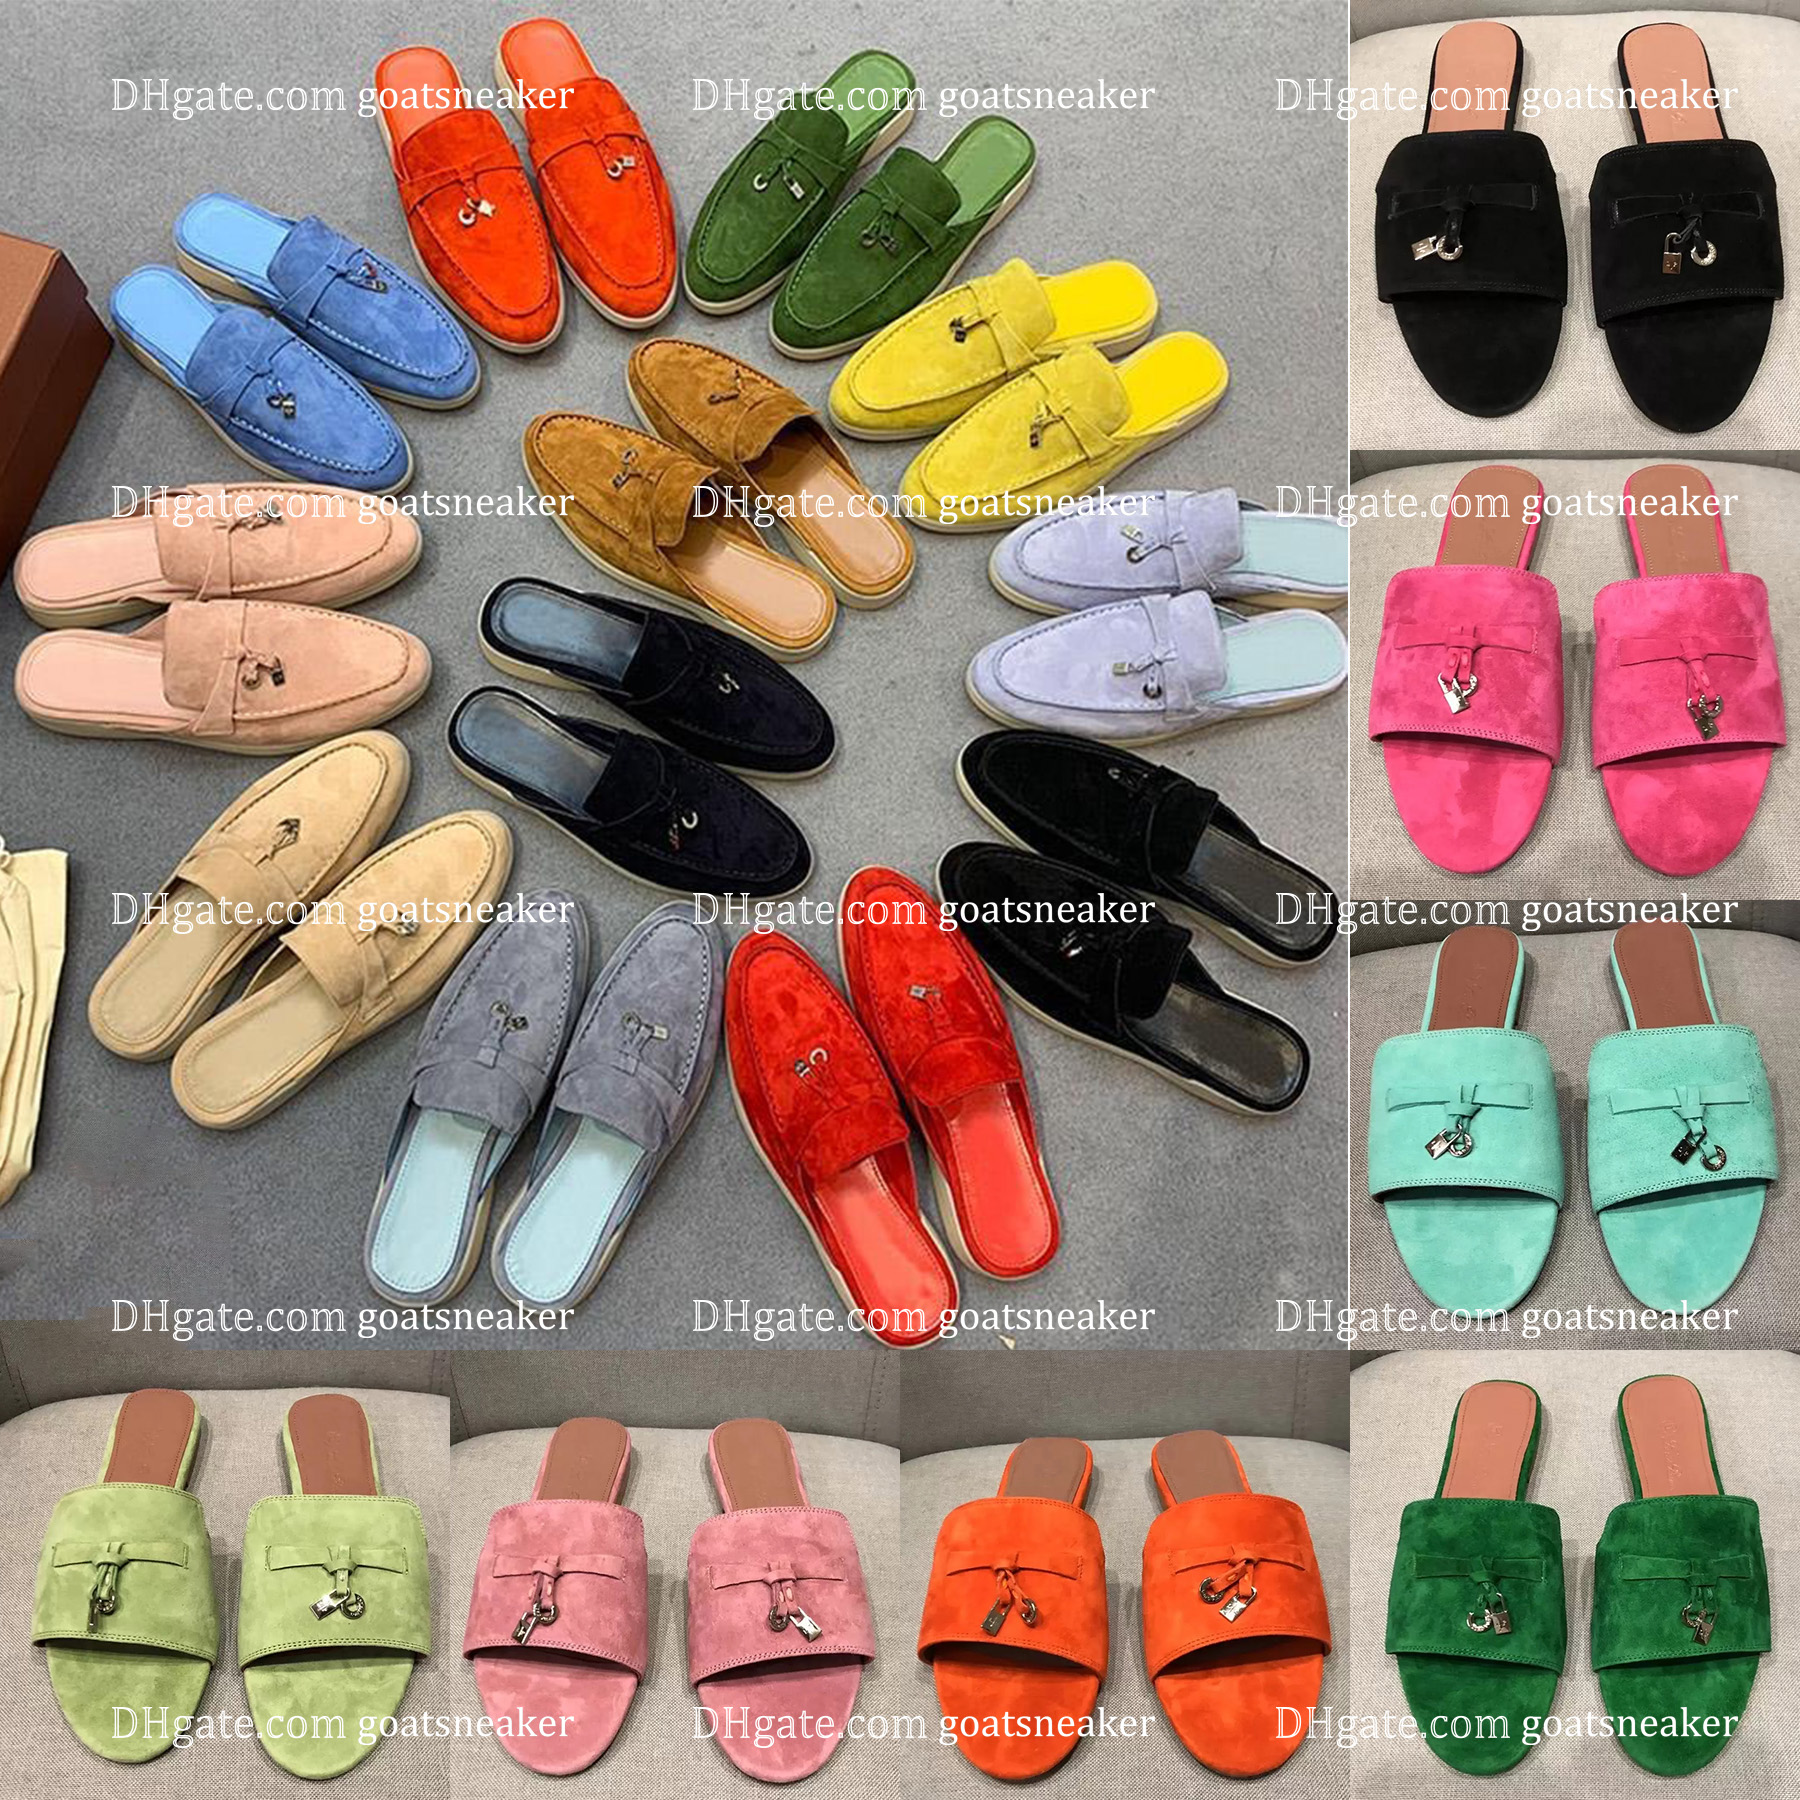 

LP Summer Charms Sandal slipper Casual shoes mens Womens Round Toe Loafers Mental Decor Chic Designer Luxury loro piana shoes buckle Flat heel comfort, 50